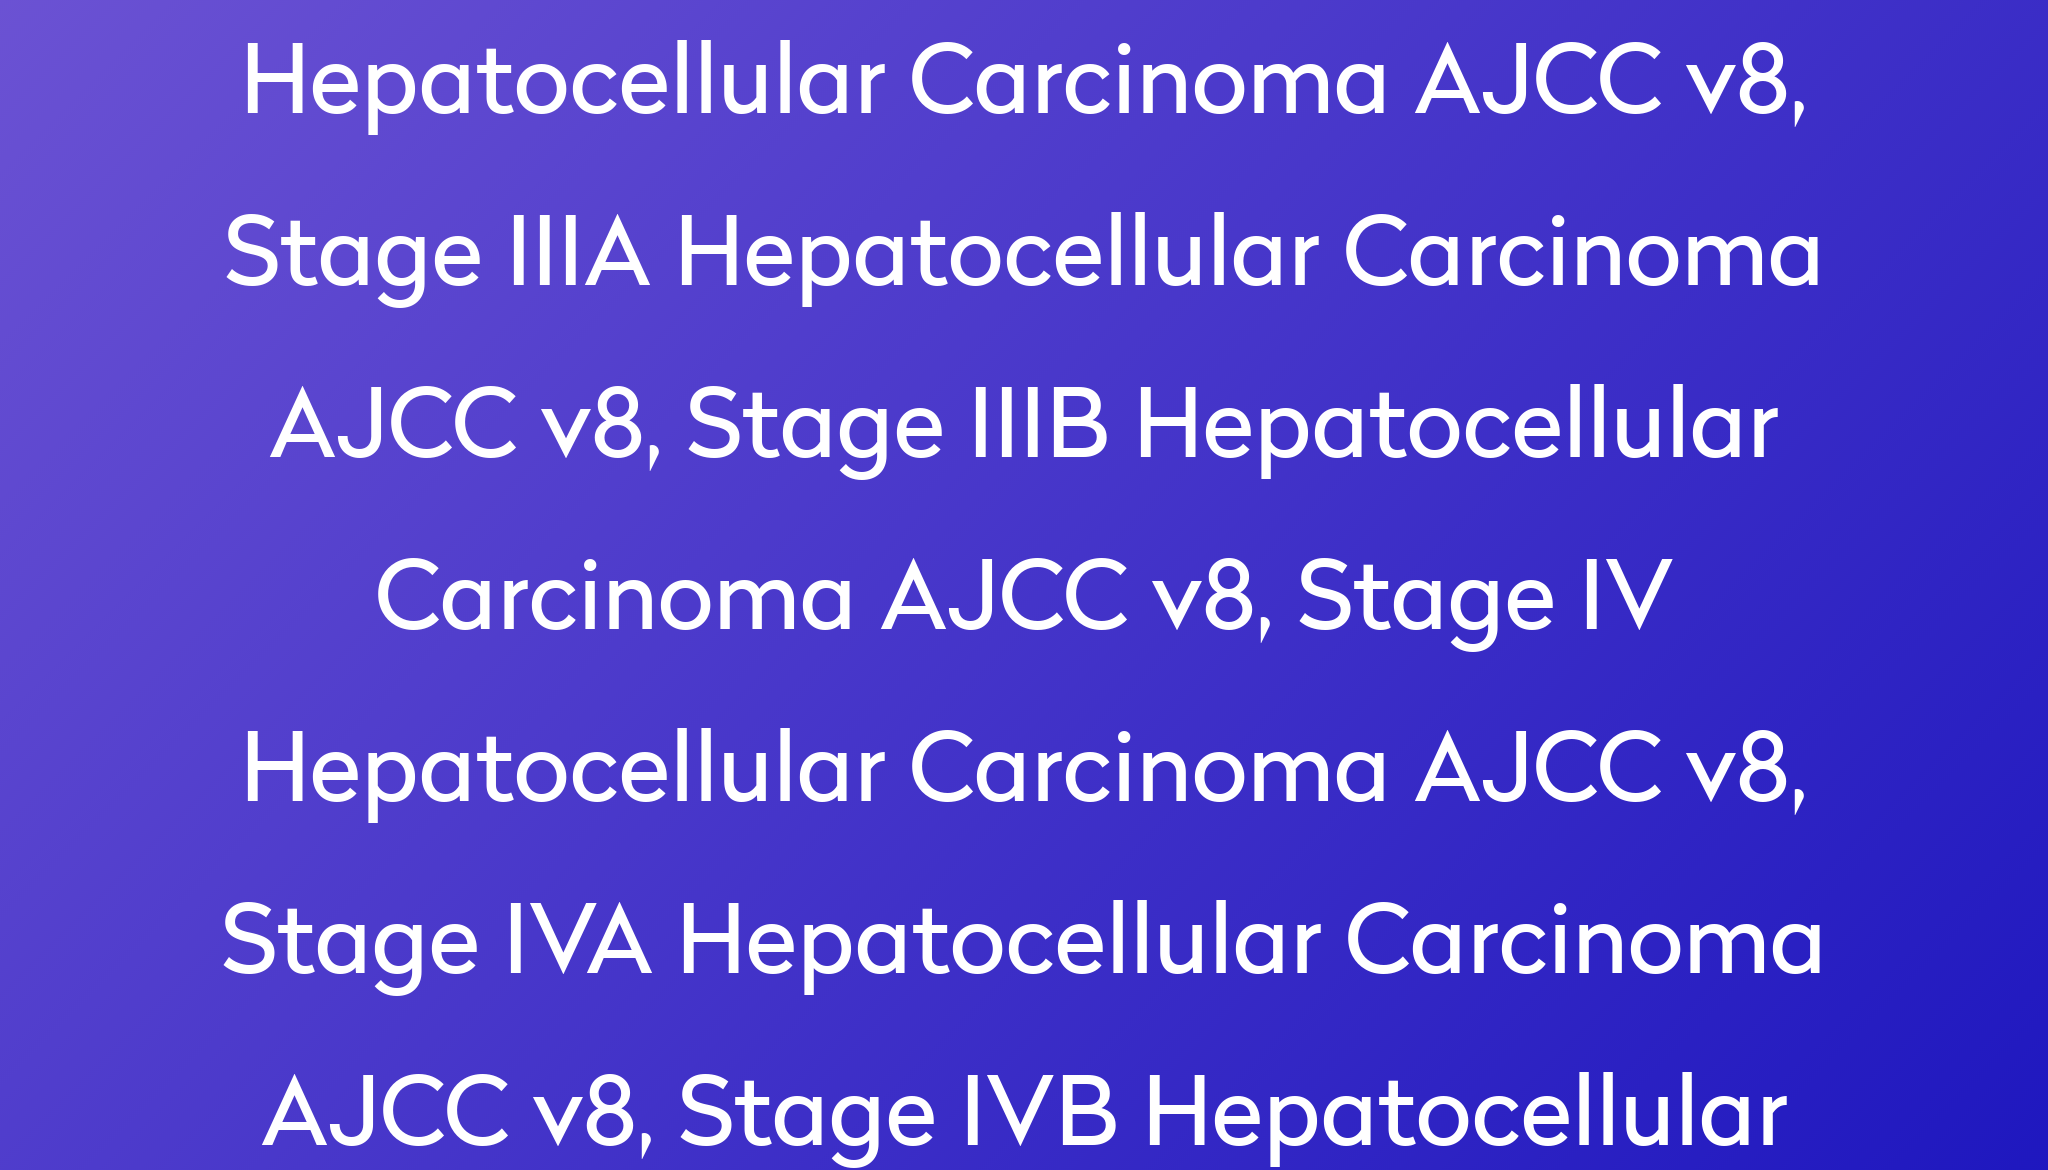 Apply To This Phase 2 Clinical Trial Treating Locally Advanced Hepatocellular Carcinoma, Metastatic Hepatocellular Carcinoma, Stage III Hepatocellular Carcinoma AJCC V8, Stage IIIA Hepatocellular Carcinoma AJCC V8, Stage IIIB Hepatocellular Carcinoma AJCC V8, Stage IV Hepatocellular Carcinoma AJCC V8, Stage IVA Hepatocellular Carcinoma AJCC V8, Stage IVB Hepatocellular Carcinoma AJCC V8, Unresectable Hepatocellular Carcinoma (HCC) %0A%0AAtezolizumab   Multi Kinase Inhibitor For Liver Cancer ?md=1